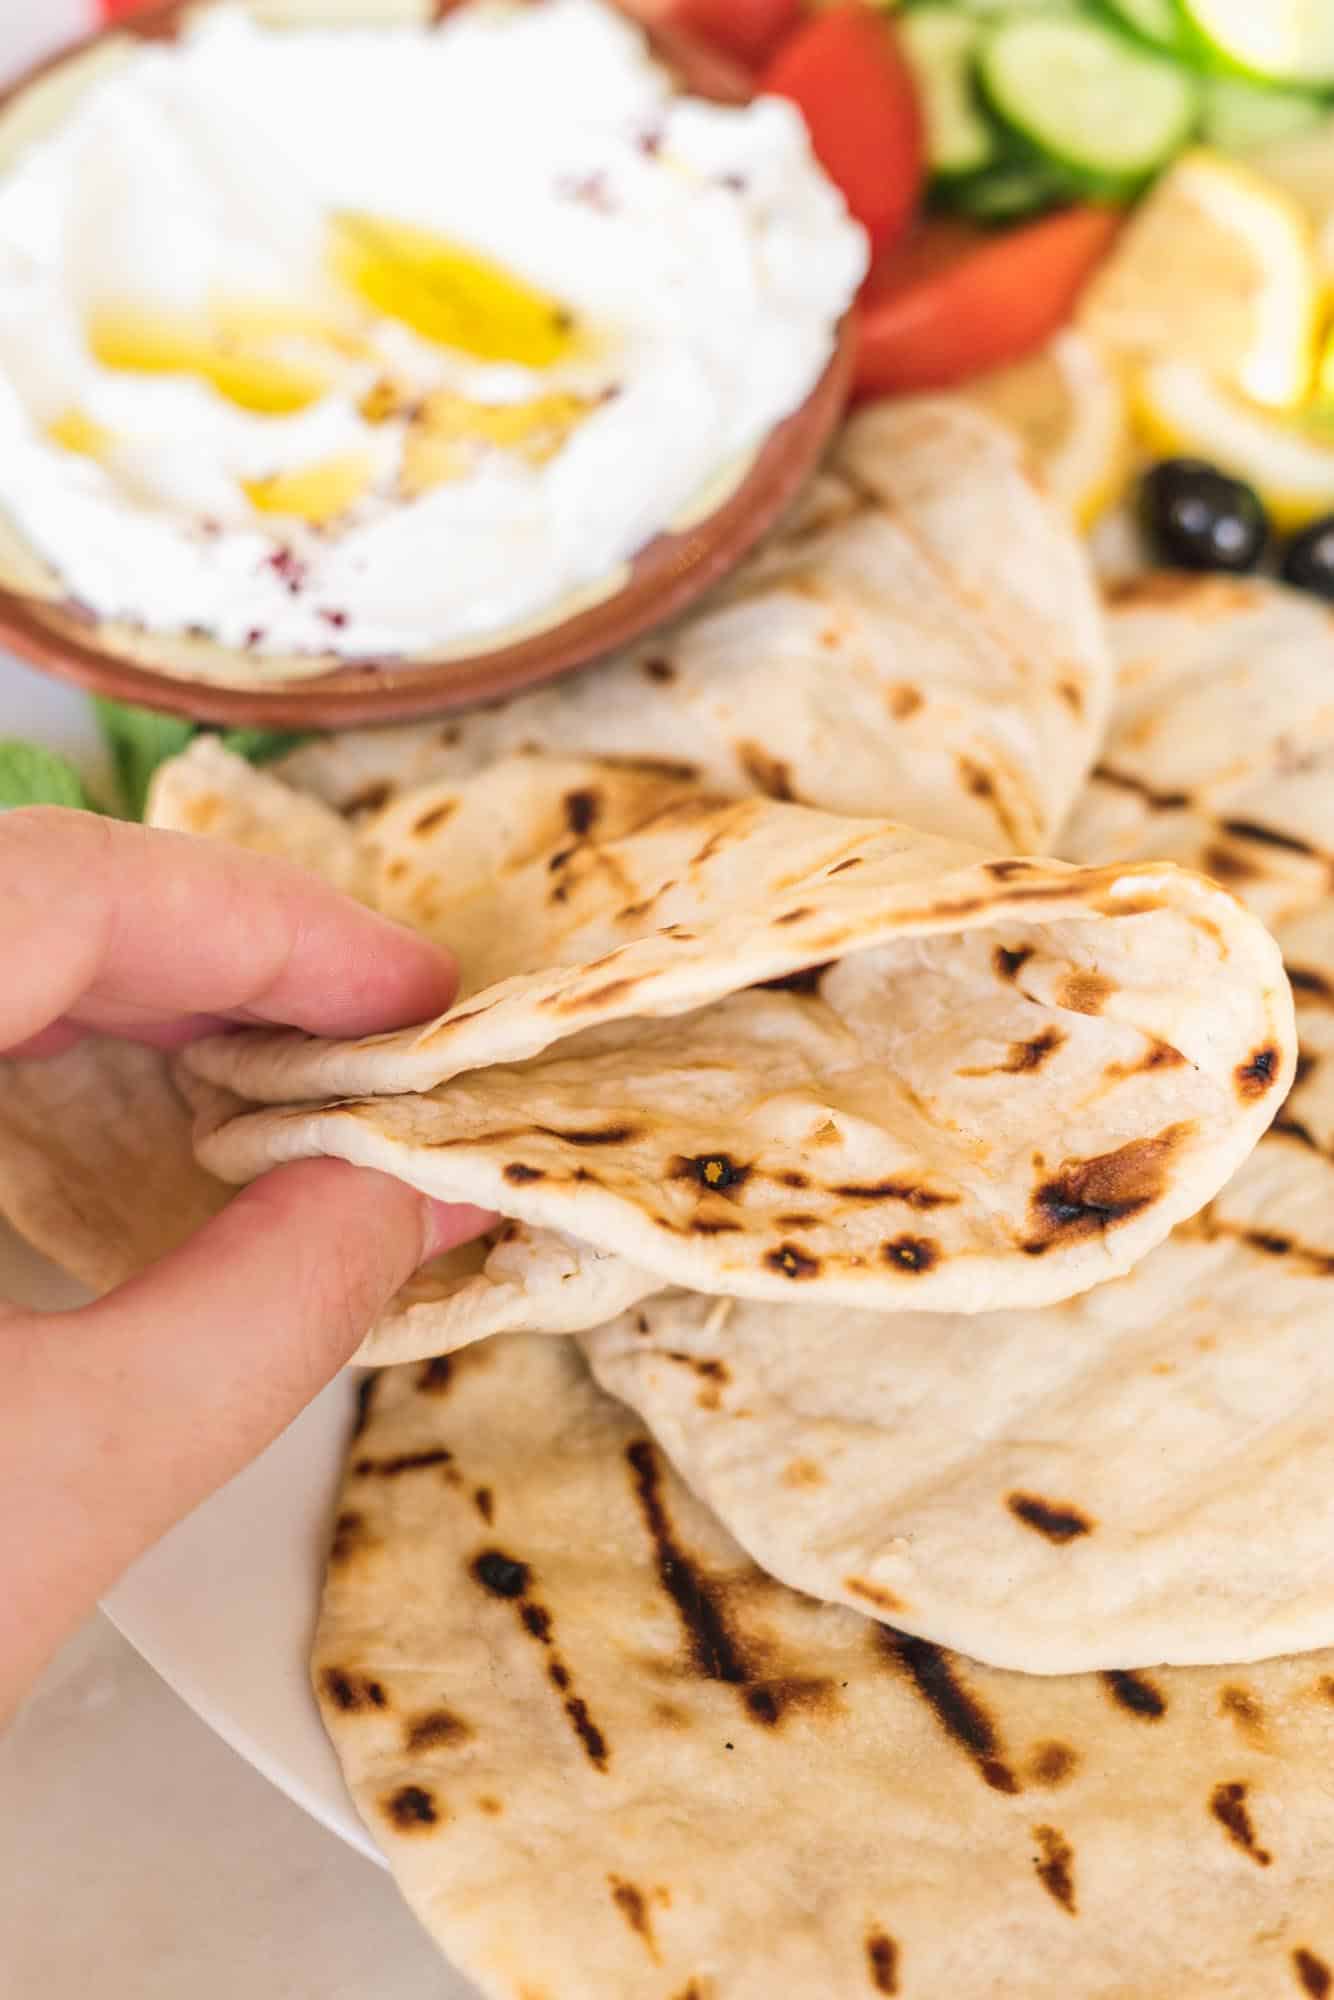 Holding a grilled flatbread to show that it's pliable and not brittle